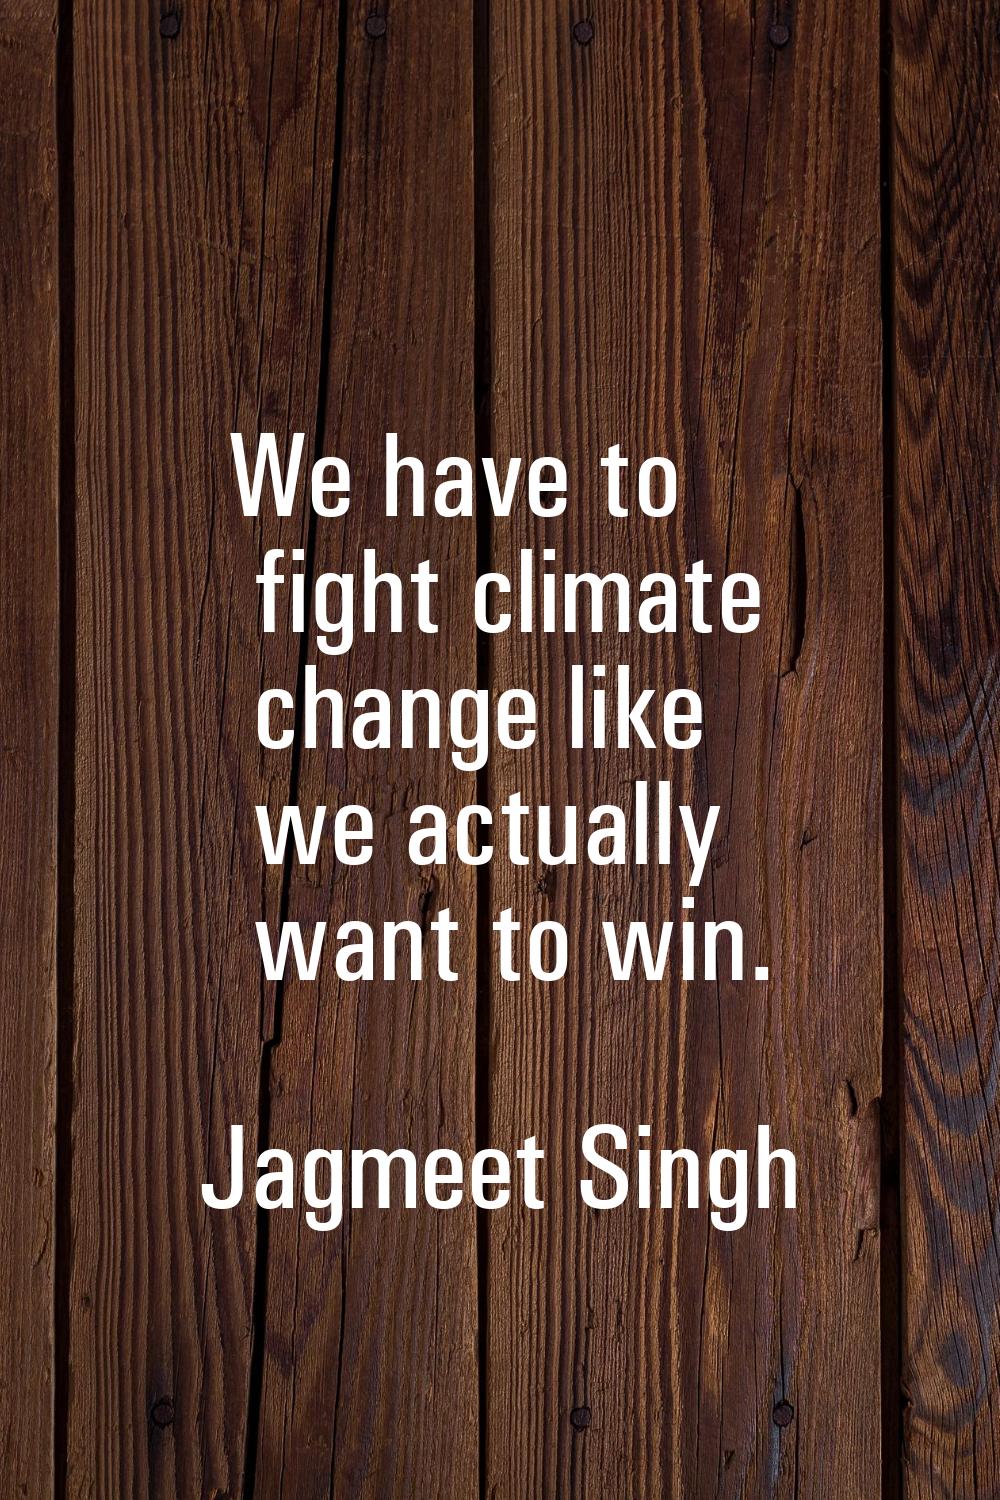 We have to fight climate change like we actually want to win.